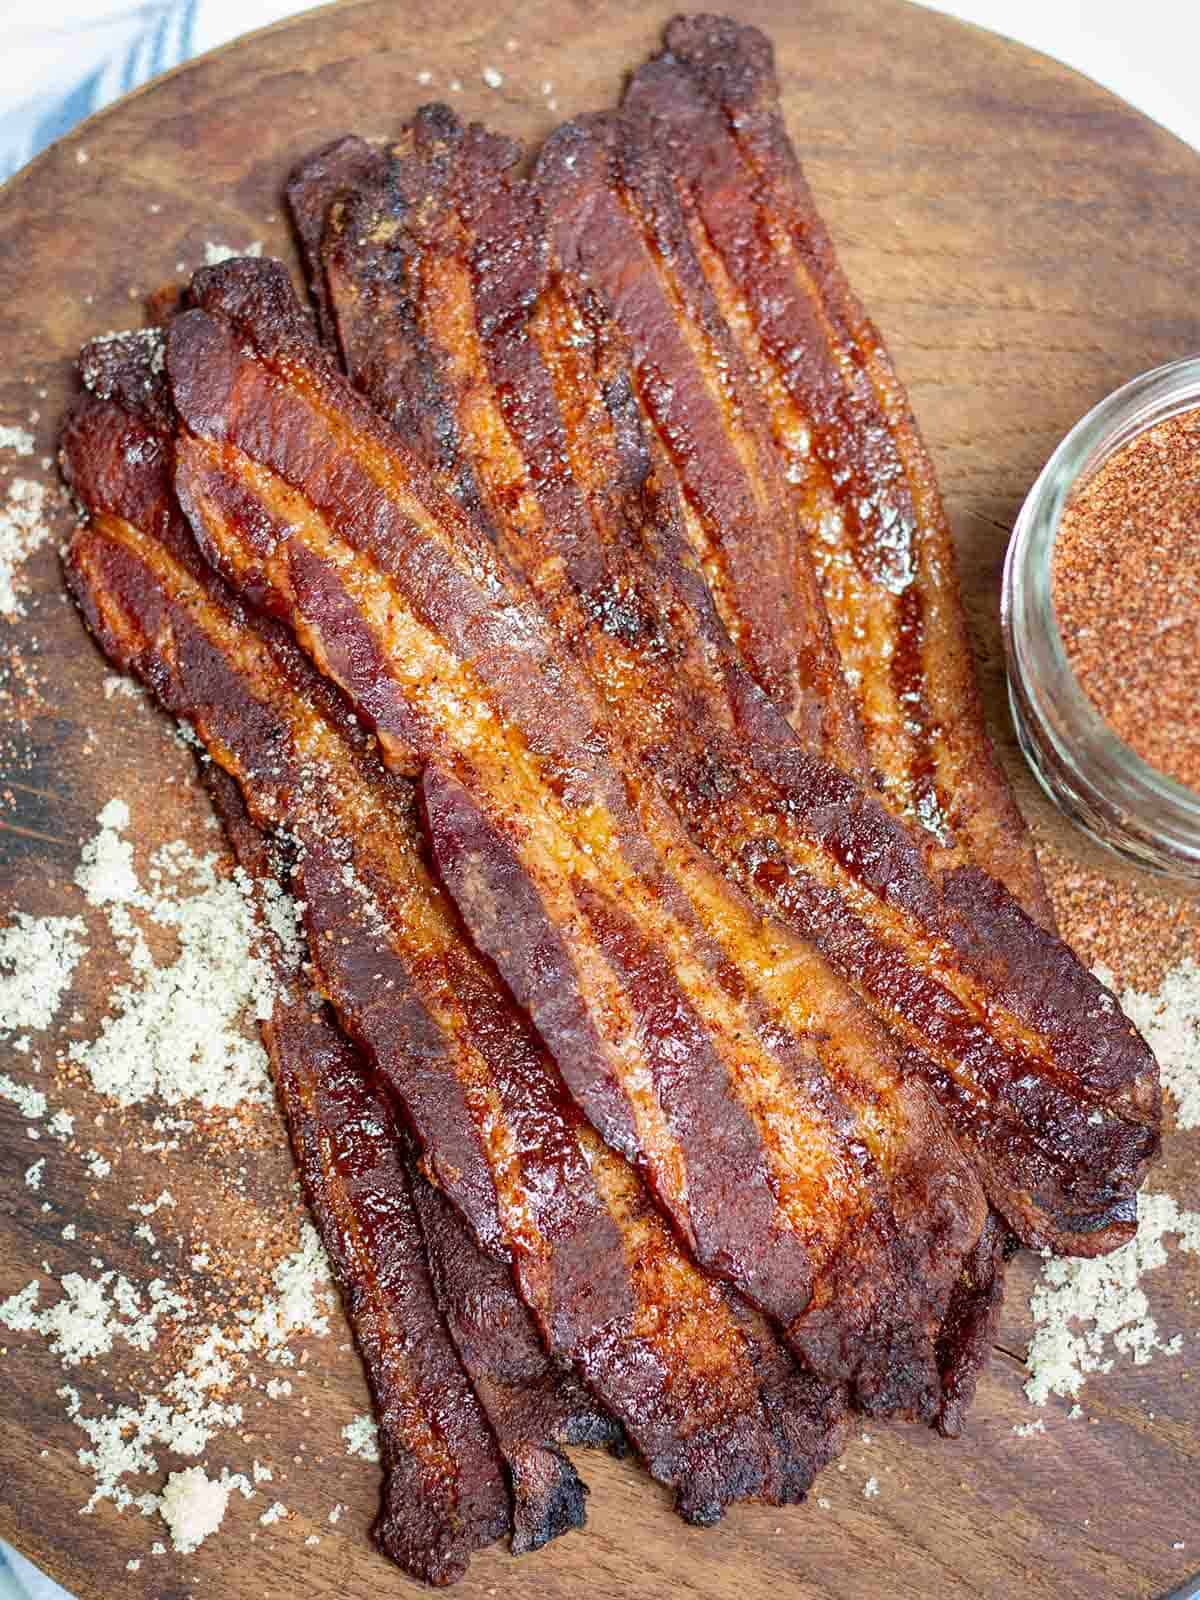 Candied bacon on a brown board with sprinkling of brown sugar and a jar of dry rub nearby.